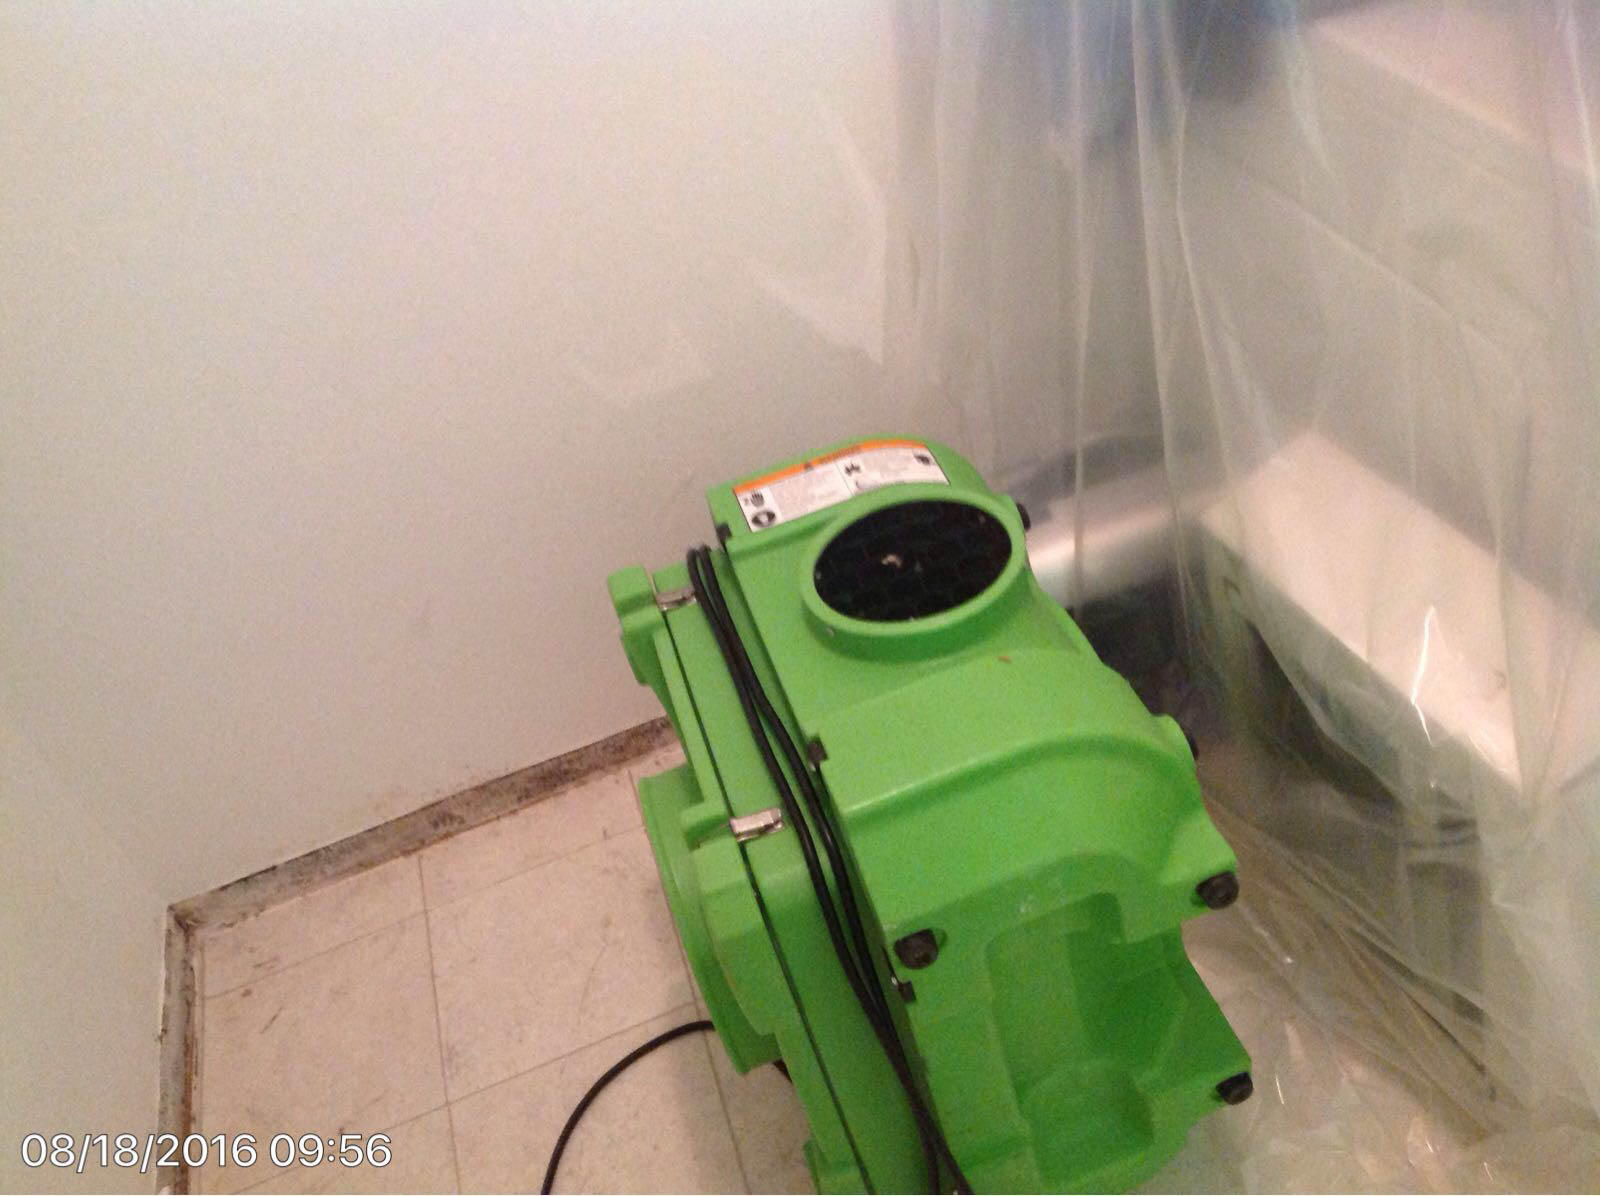 If you have a water leak, be sure to contact the professionals. SERVPRO of Tyler's technicians are trained and licensed in water mitigation! (903) 561-0168